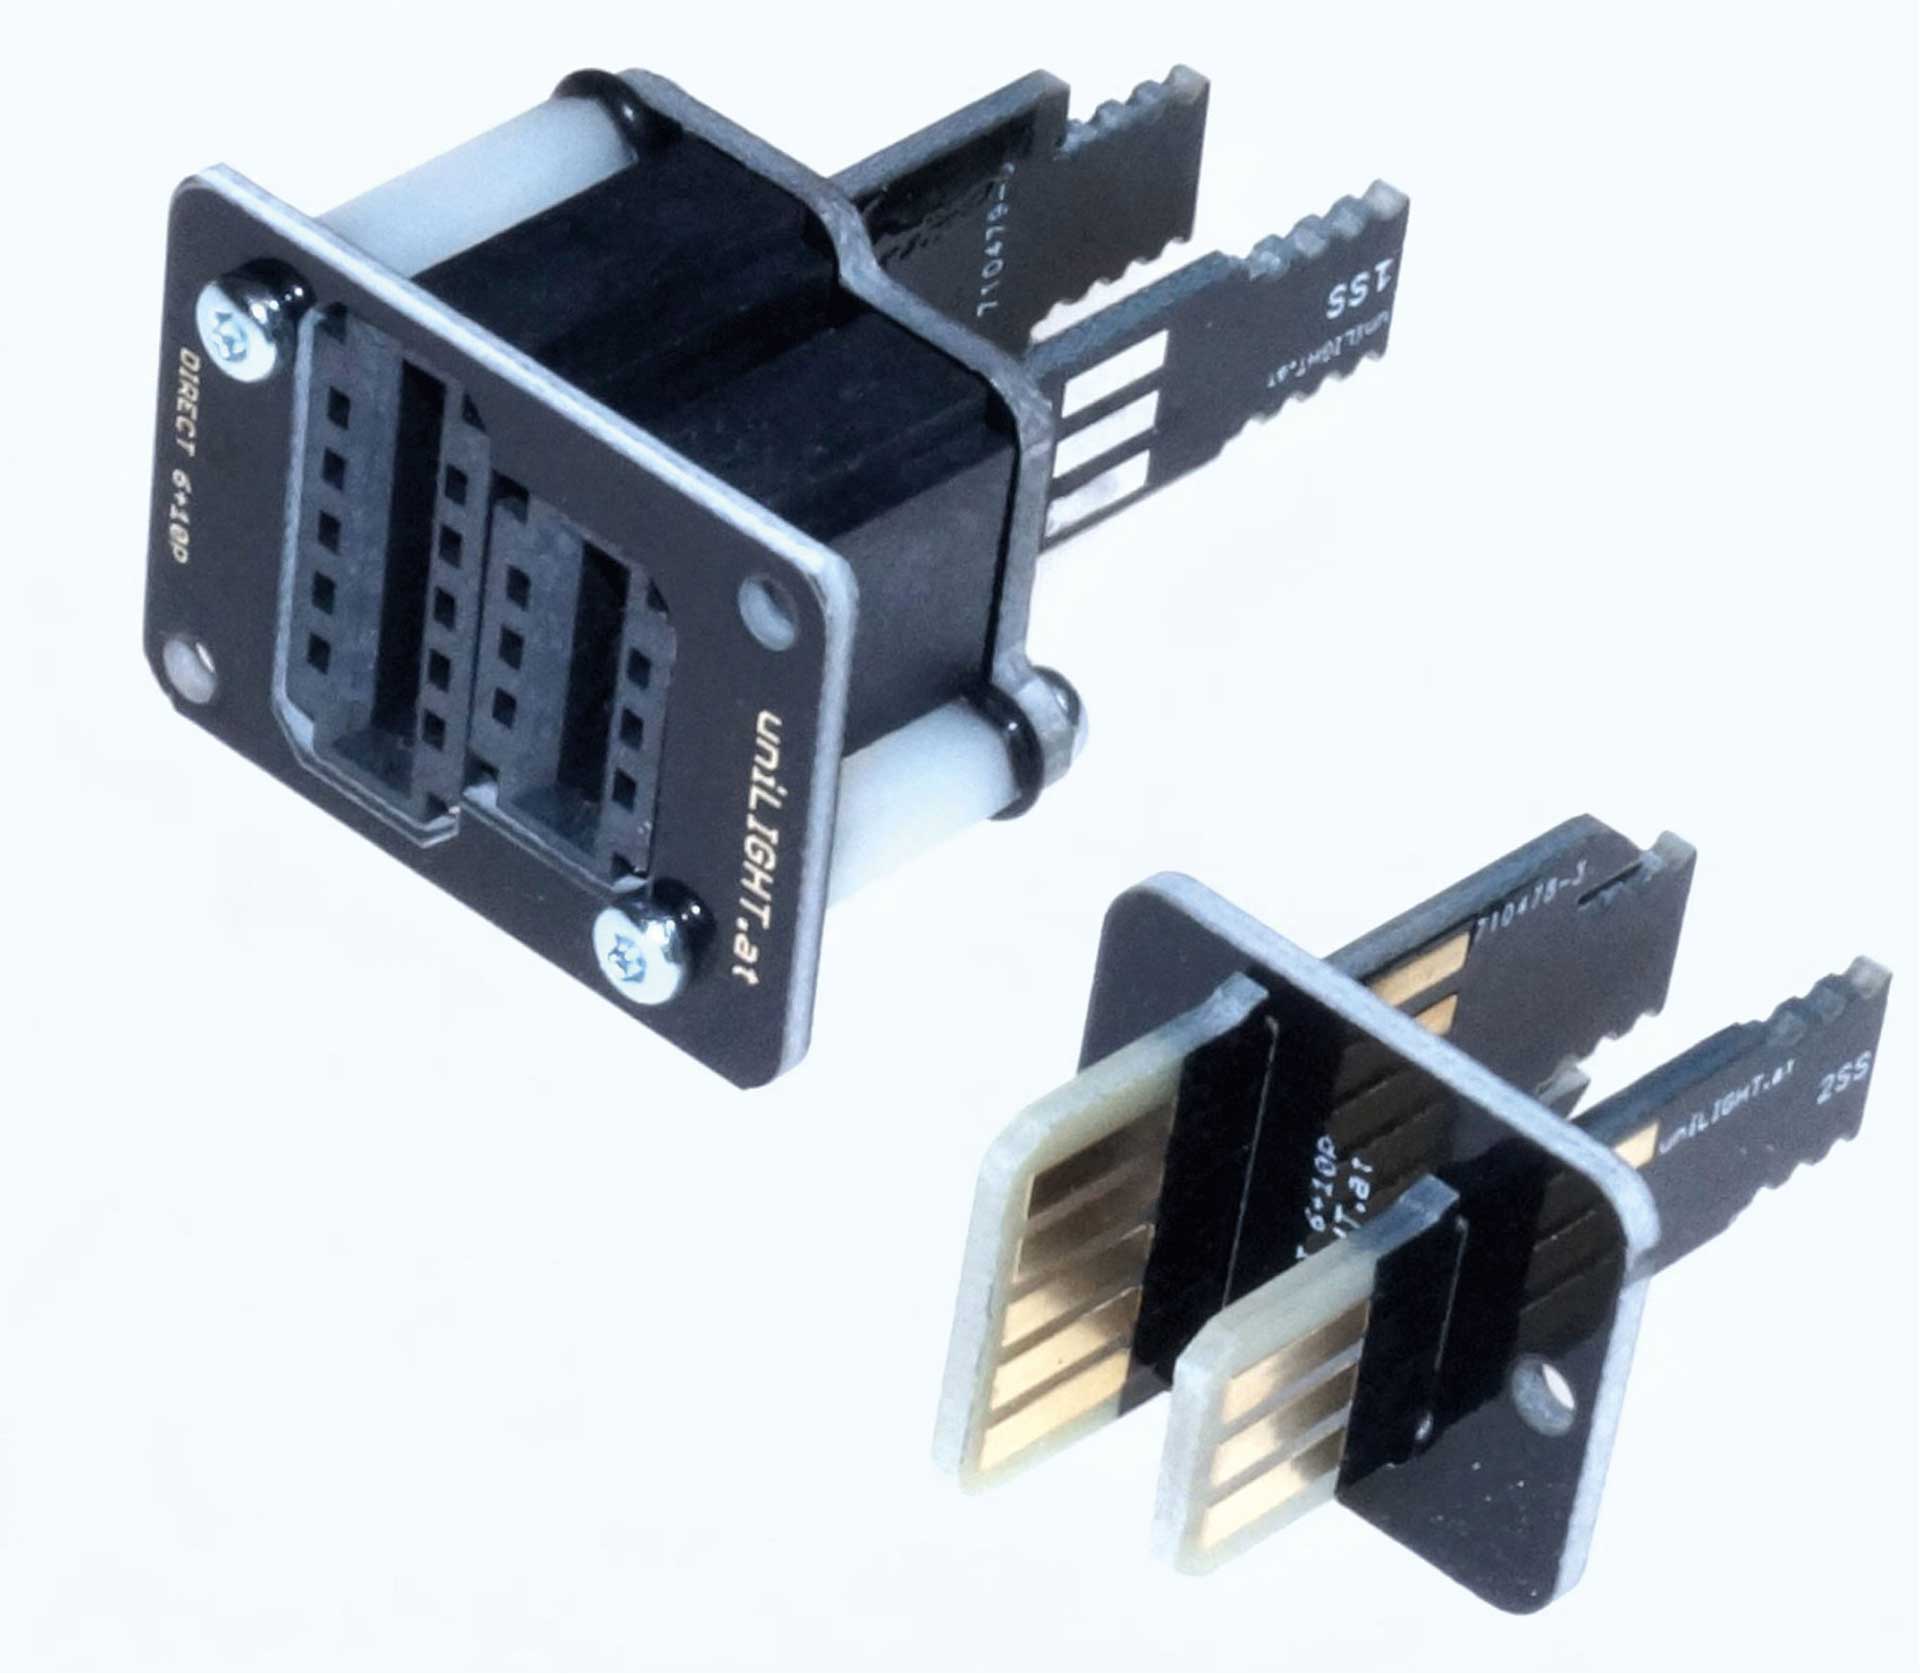 UNILIGHT DIRECT PLUG-IN CONNECTION DIRECT WITH 6 PRIMARY AND 4 SECONDARY POLES FOR 2 SERVOS AND 4 POLES FOR UP TO 3 LIGHTS